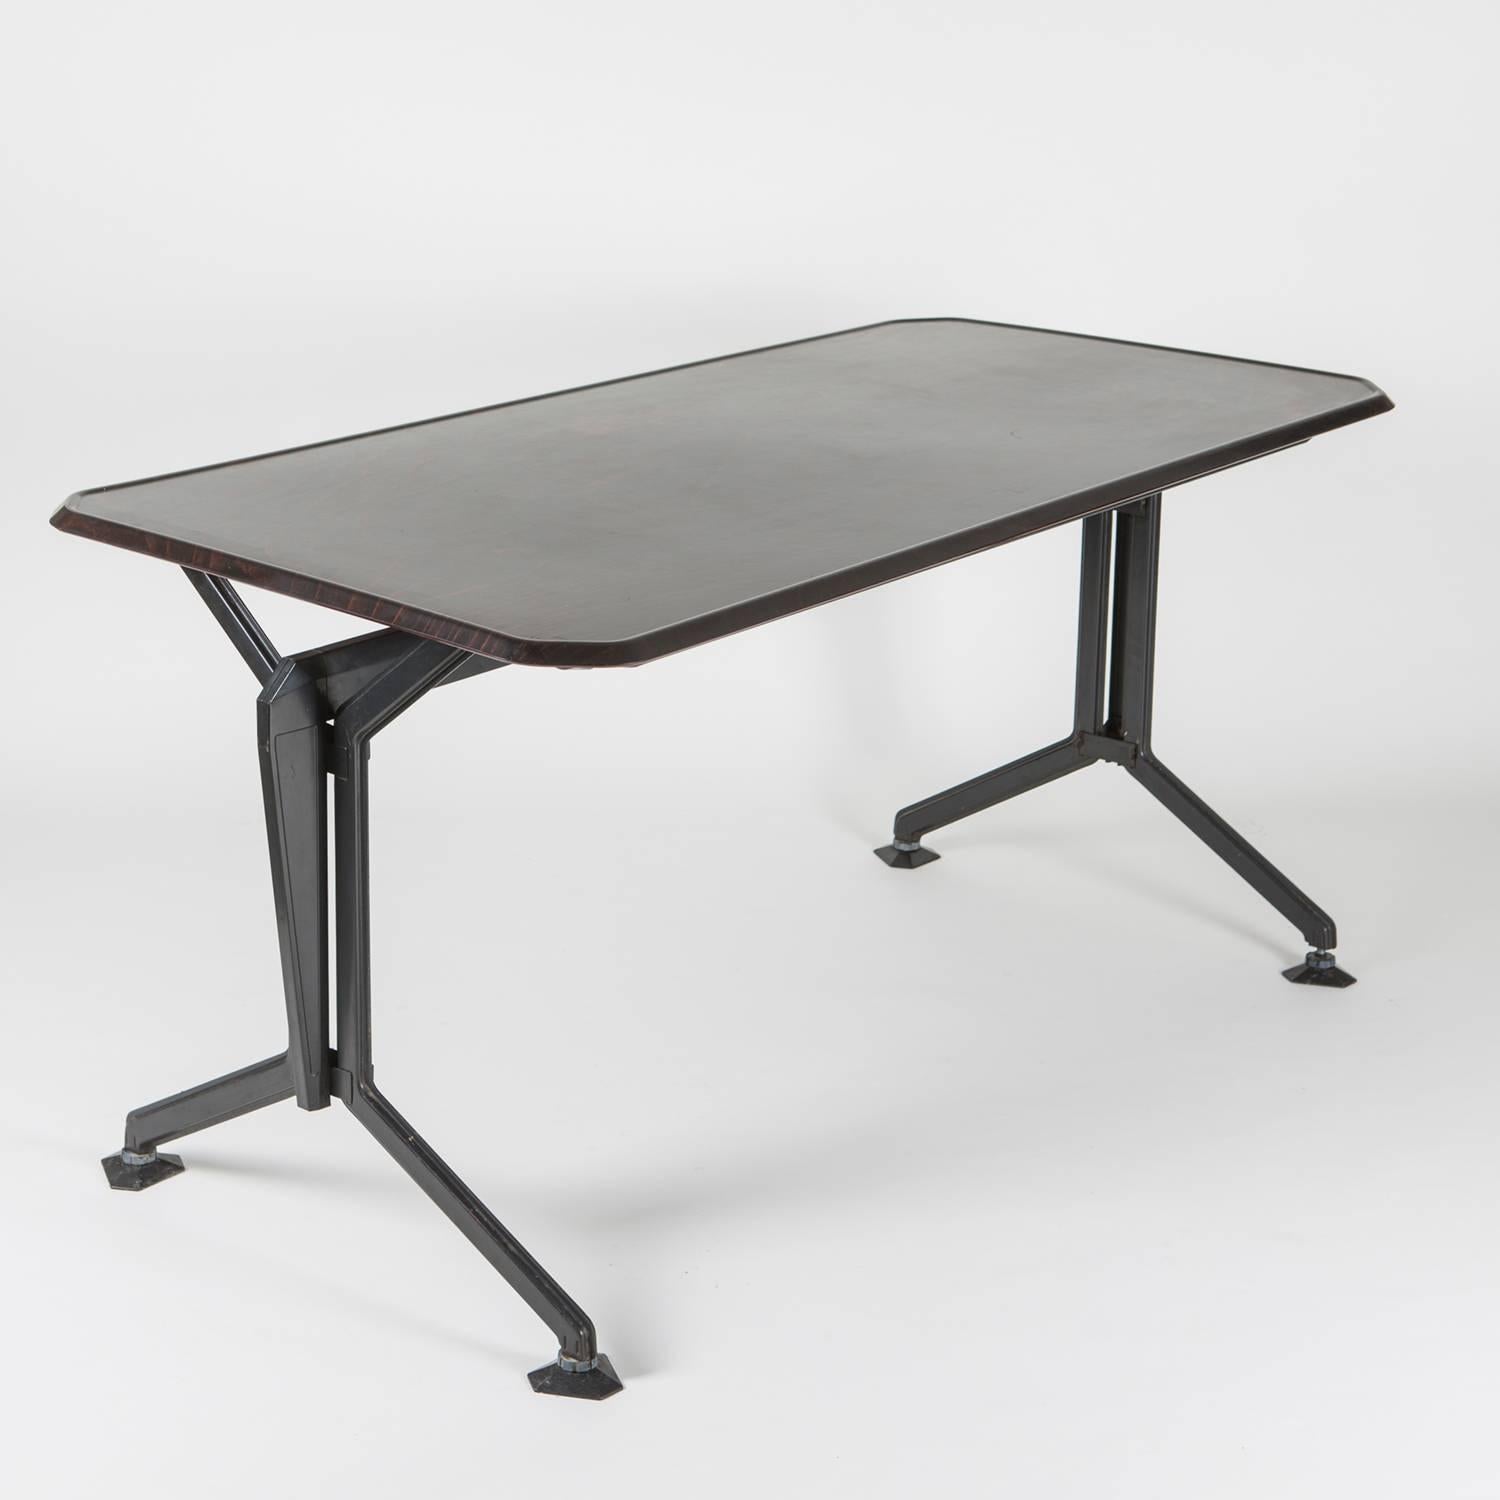 Desk by B.B.P.R. for Olivetti.
Part of the 